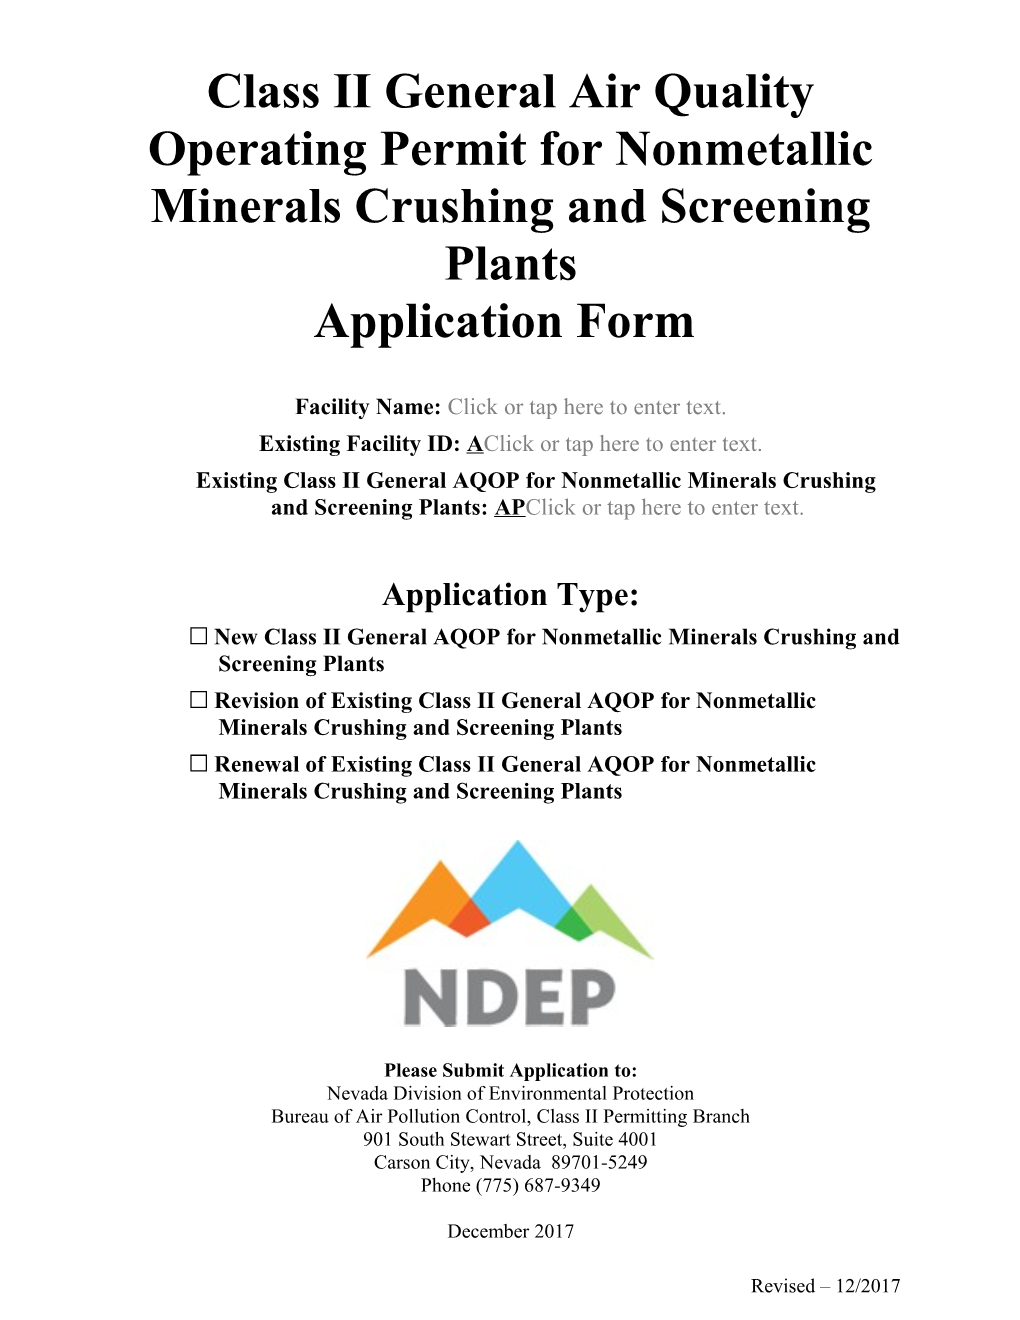 Class II General Air Quality Operating Permit for Nonmetallic Minerals Crushing and Screening